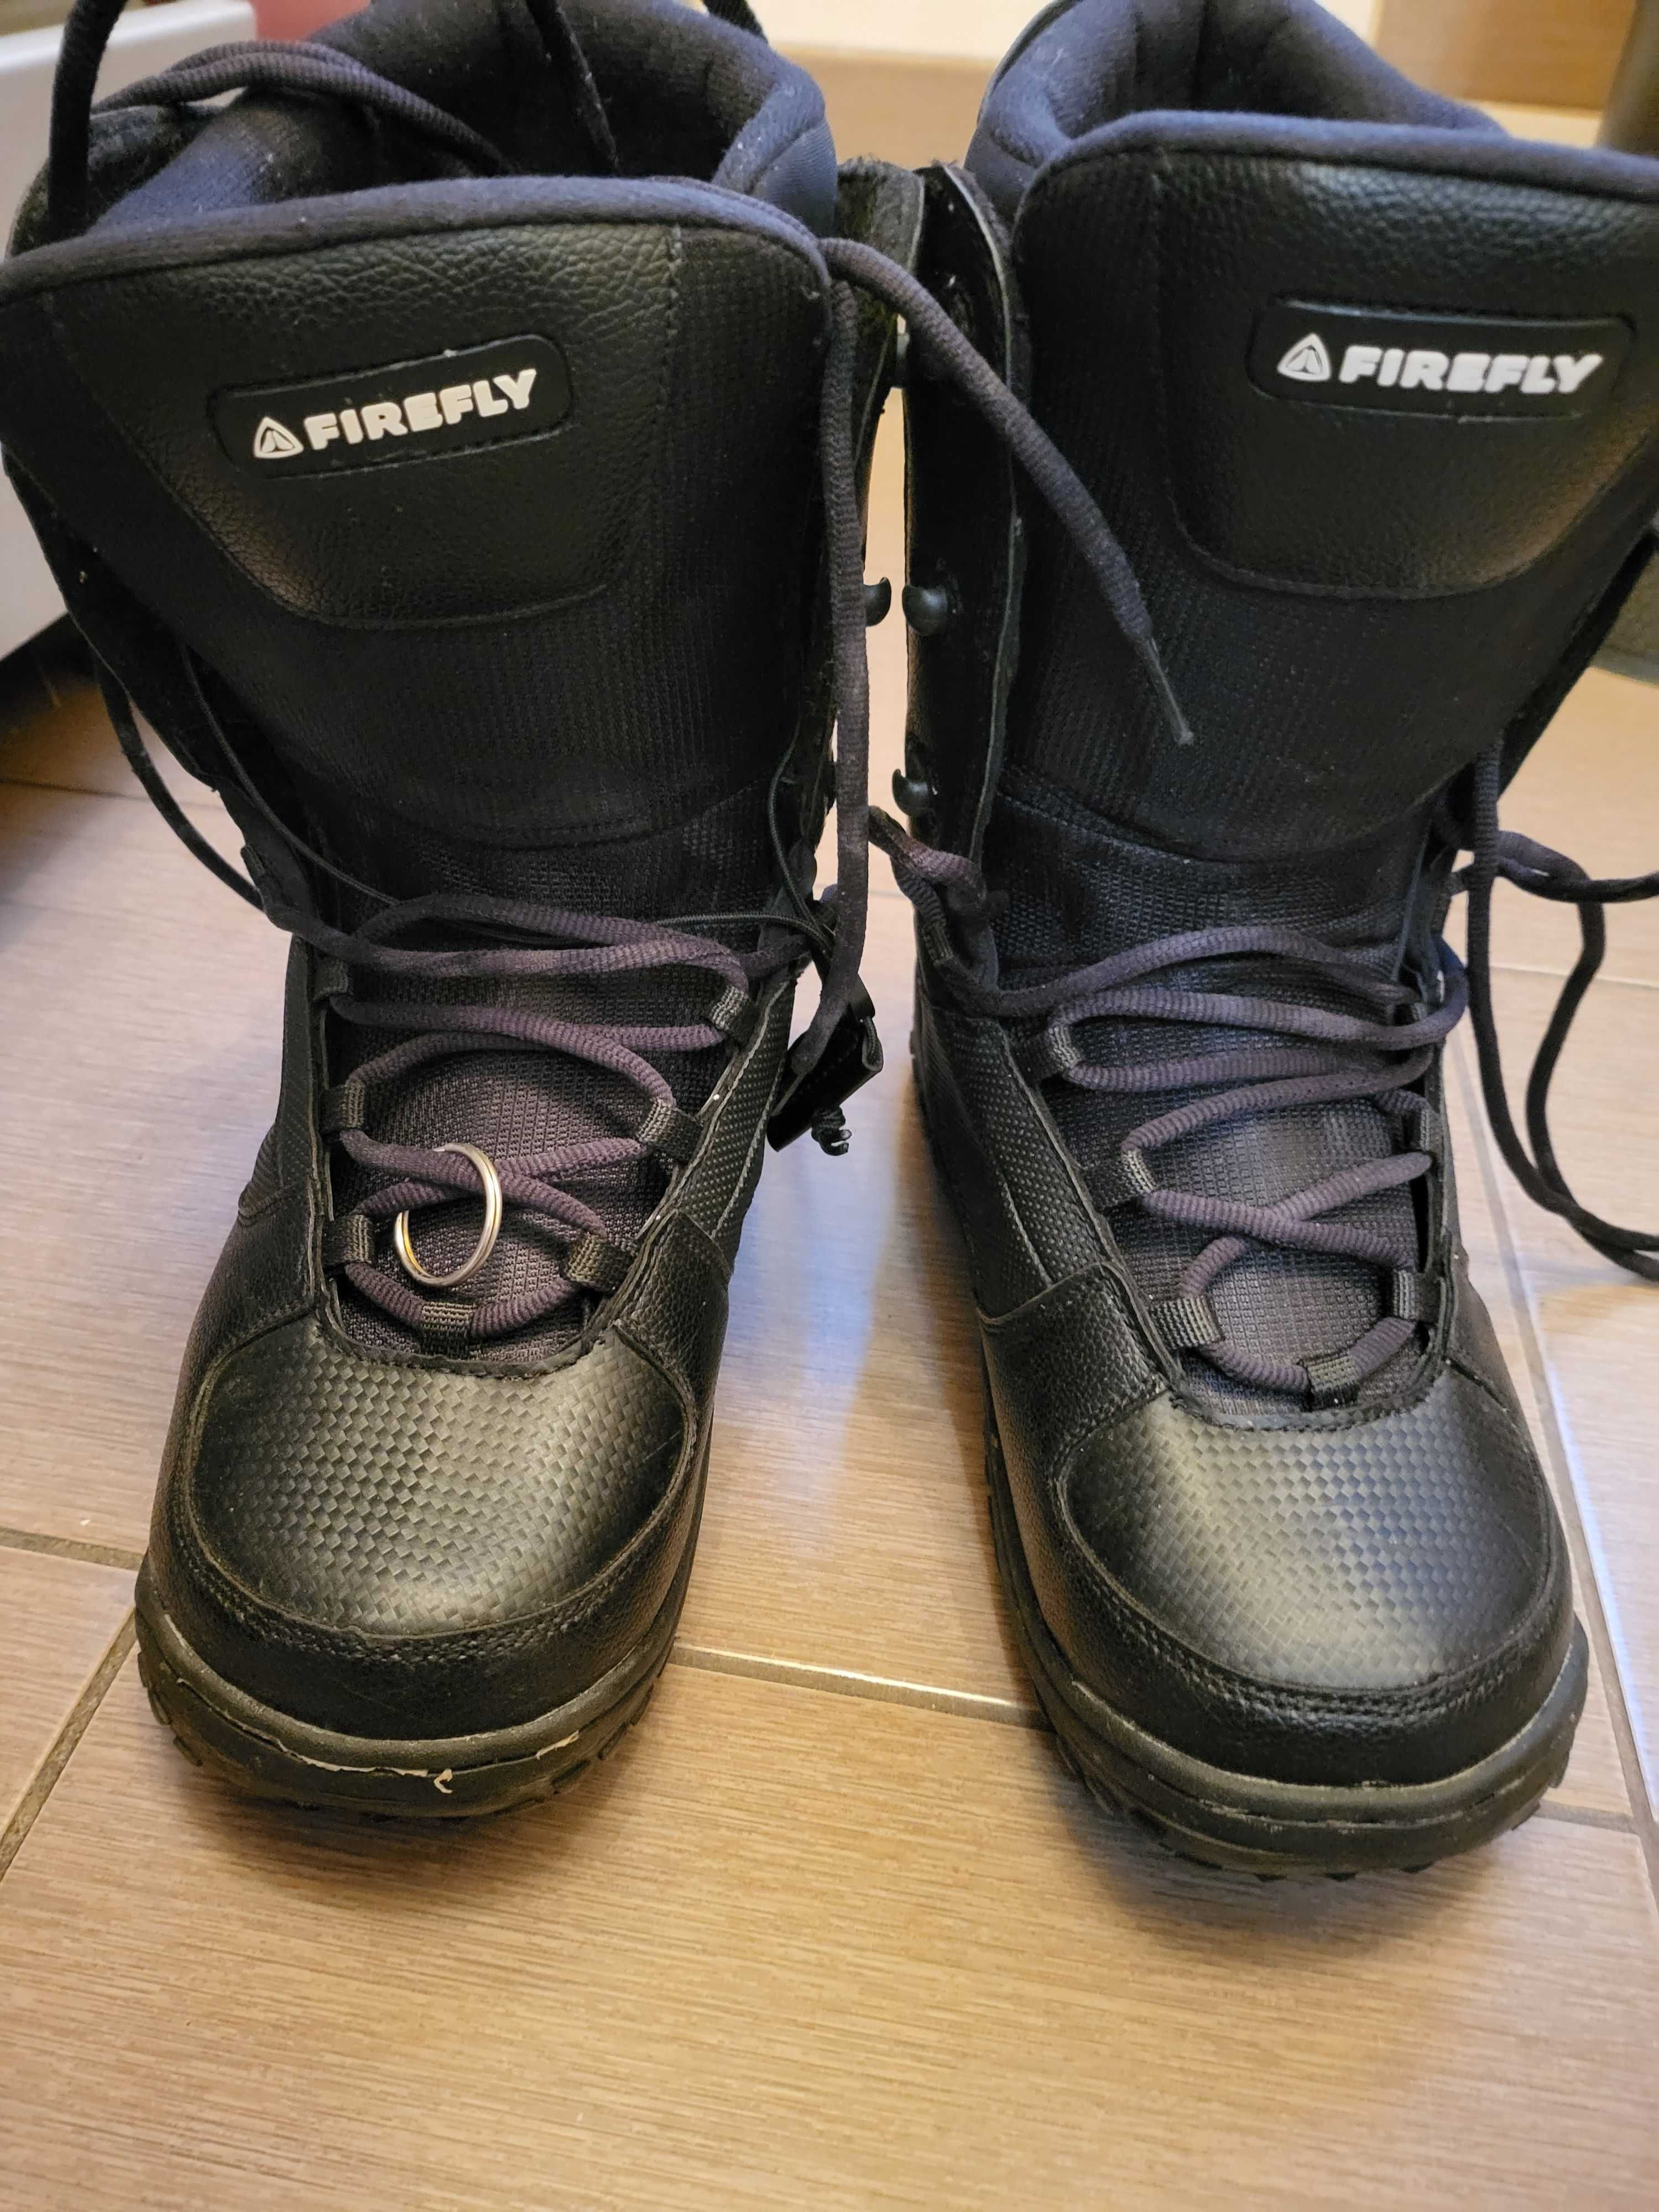 Snow boots Firefly